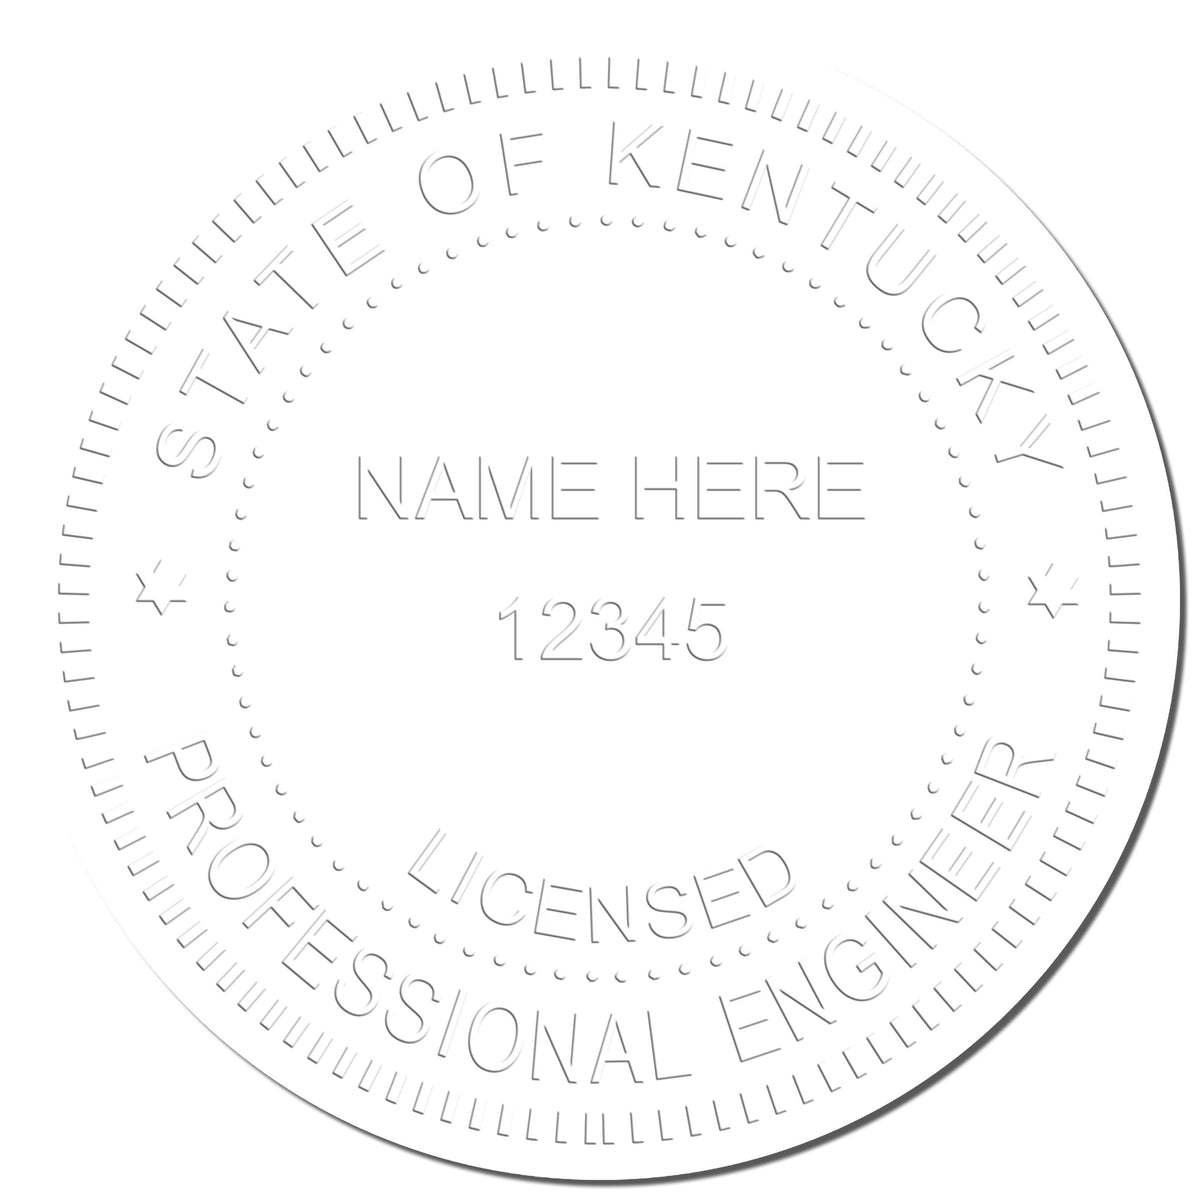 This paper is stamped with a sample imprint of the State of Kentucky Extended Long Reach Engineer Seal, signifying its quality and reliability.